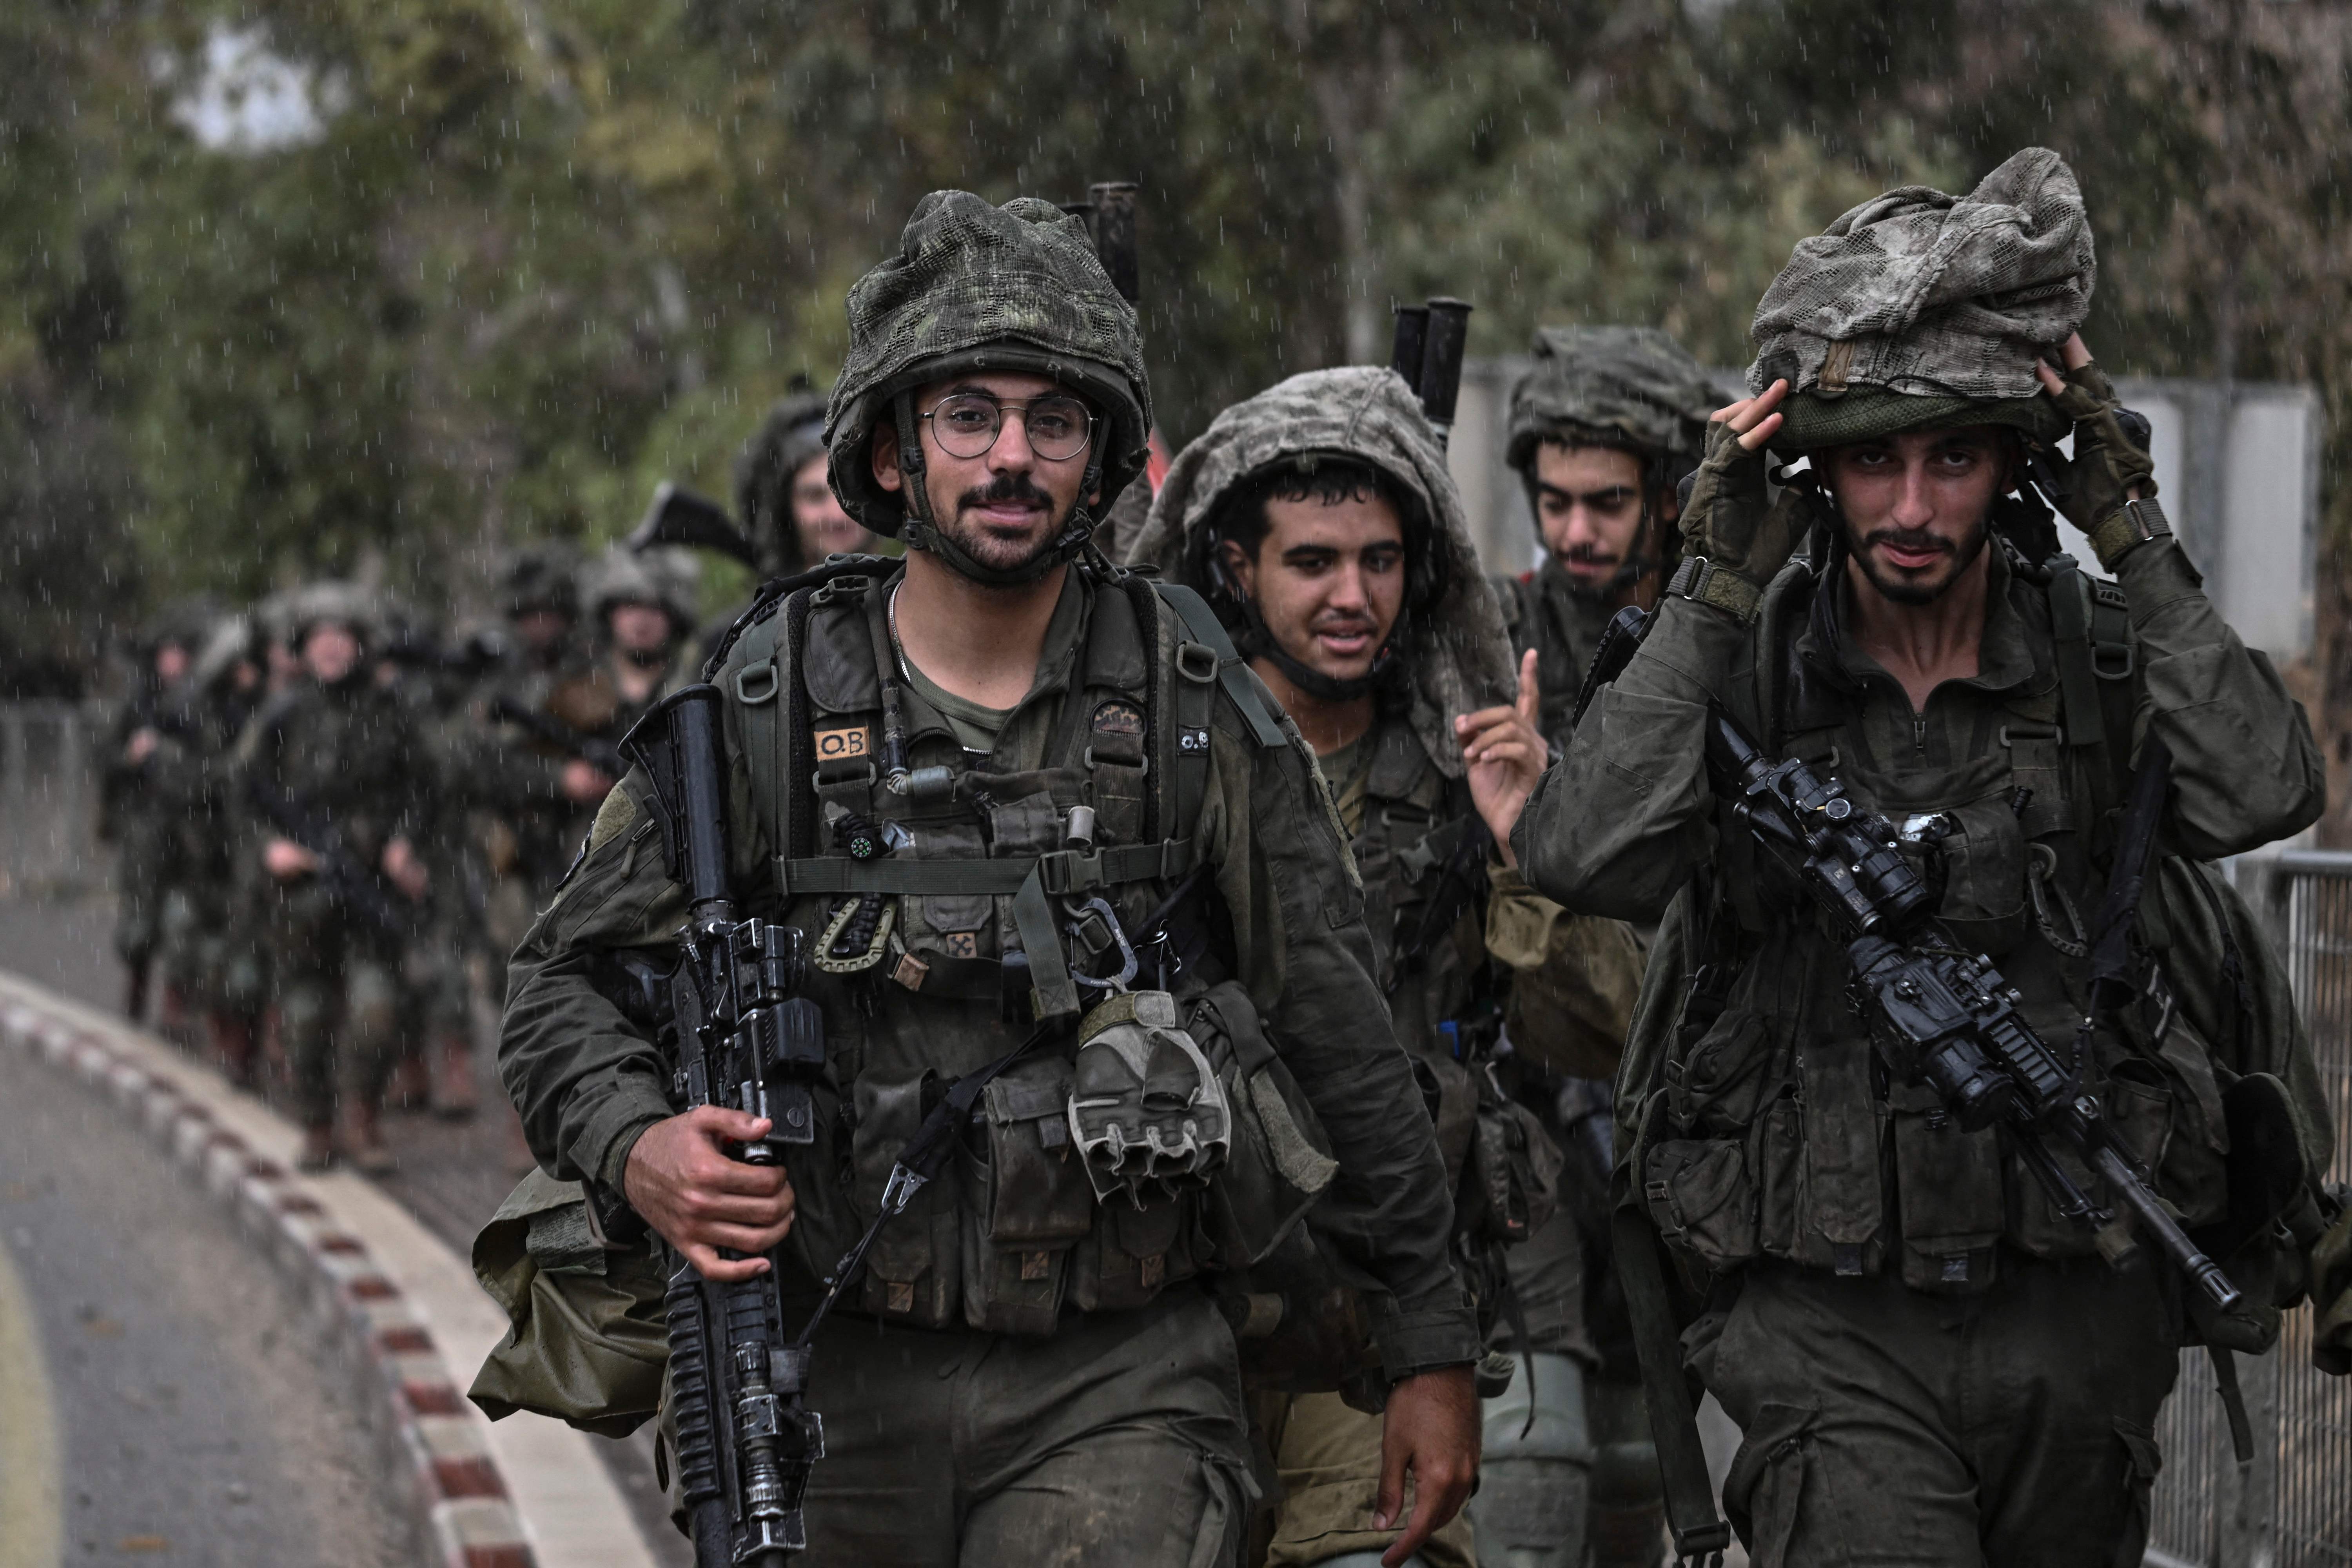 Israeli army soldiers patrol at an undisclosed position in northern Israel near the borer with Lebanon on October 15